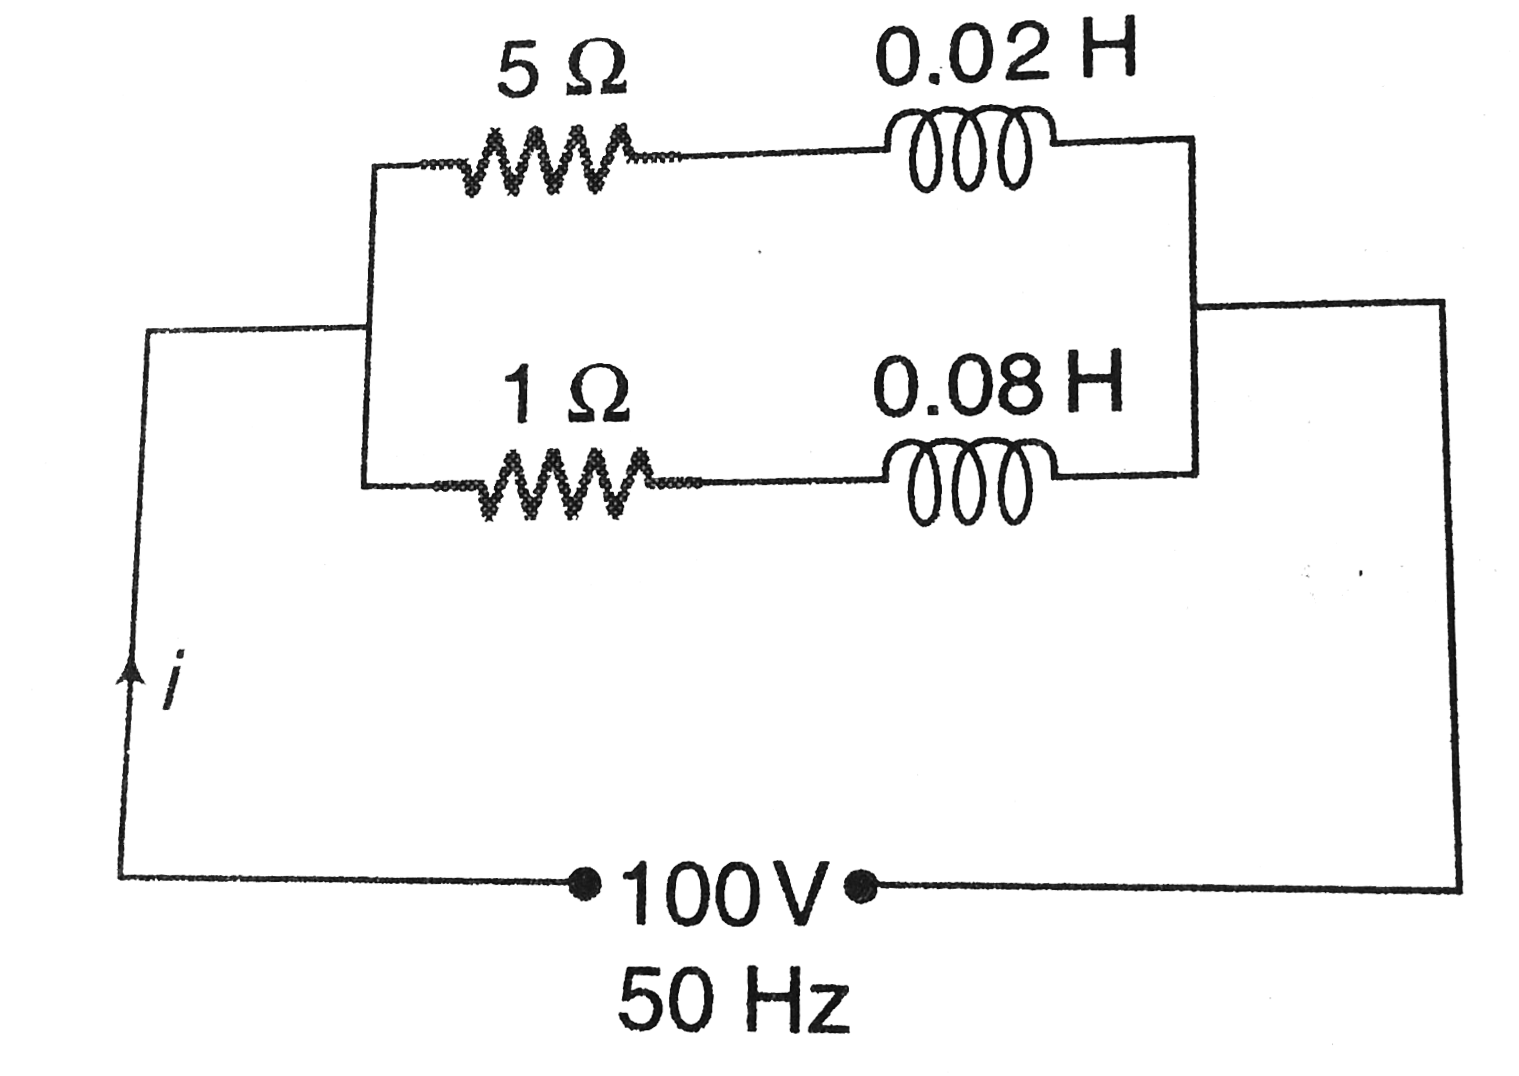 A coil having a resistance of 5 Omega and an inductance of 0.02 H is arranged in parallel with another coil having a resistance of 1Omega and an inductance of 0.08 H. Calculate the power absorbed when a voltage of 100 V at 50 Hz is applied.   .